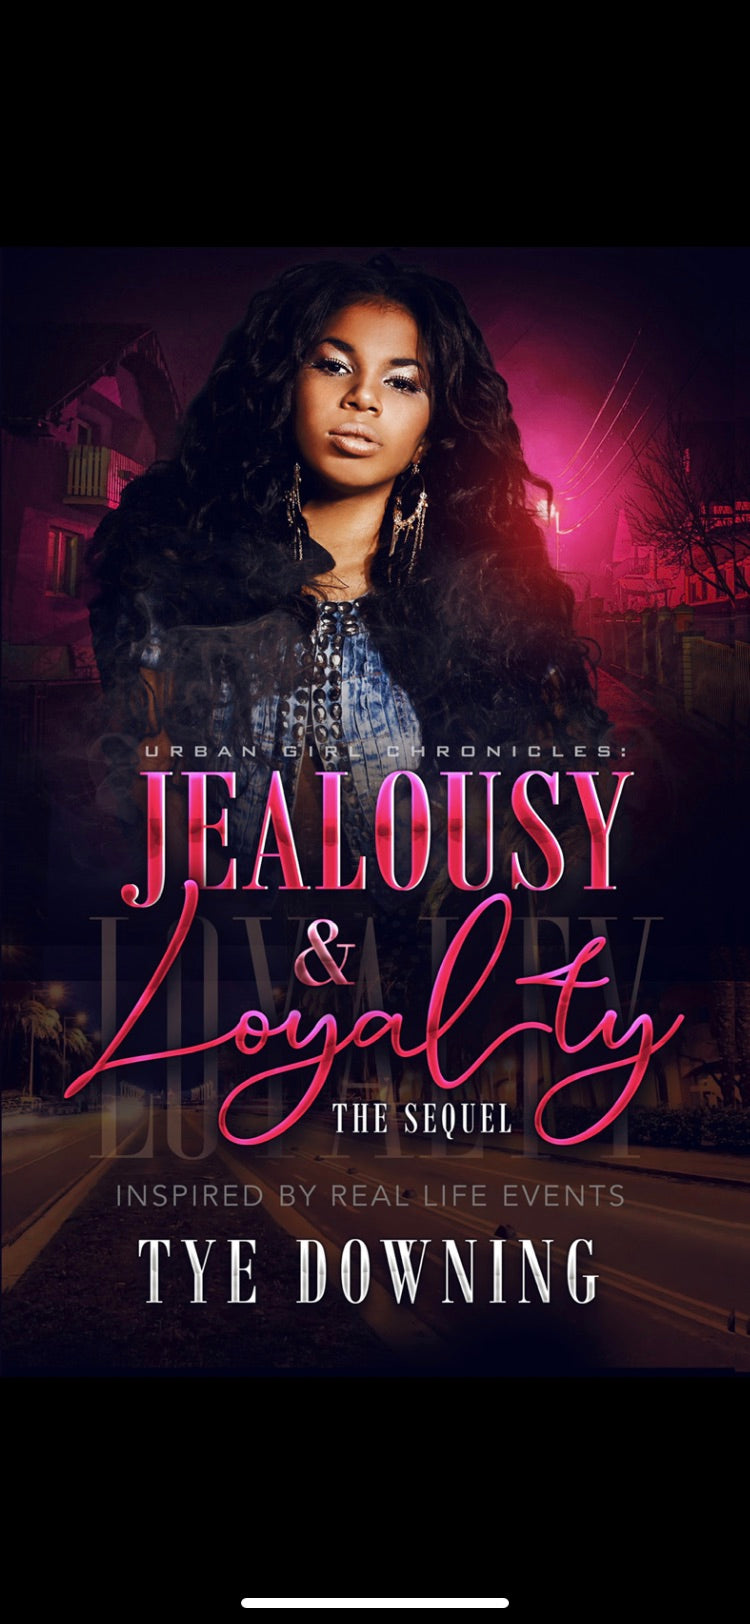 Urban Girl Chronicles: Jealousy & Loyalty Paperback Signed (Part 2) - Dior Apothecary